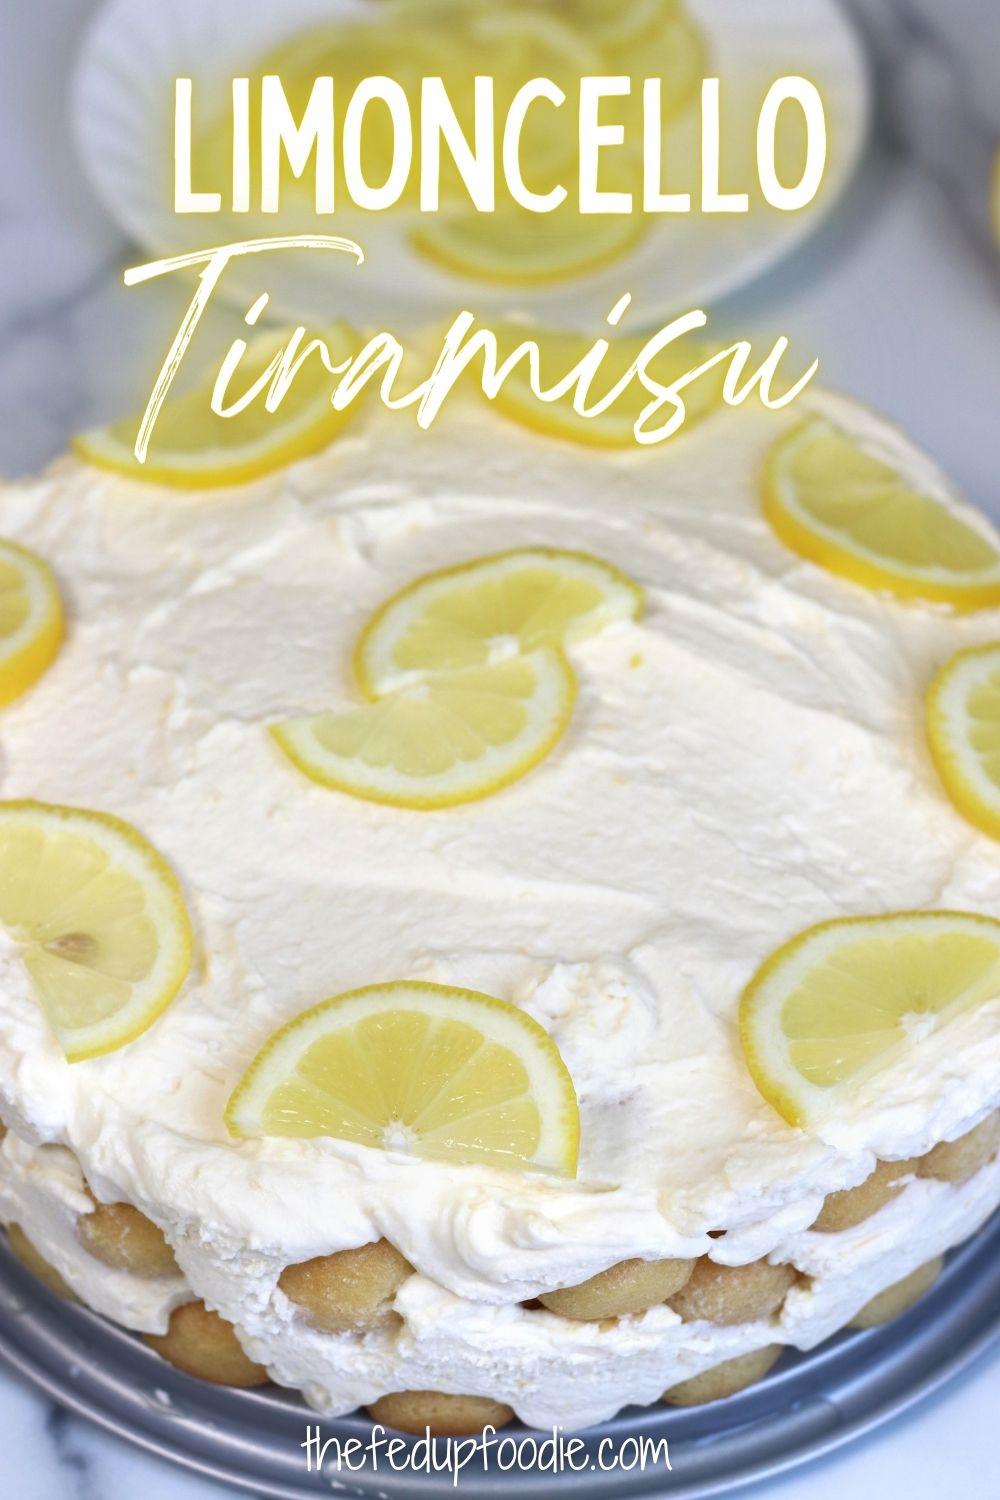 Limoncello Tiramisu has Italian lemon liqueur soaked lady fingers and a  fluffy lemon mascarpone cheese mixture. This is a delightful summery spin off of the classic Tiramisu that is perfect for summer entertaining. A citrusy dessert that is very easy to make and incredibly refreshing. #LimoncelloTiramisu #LimoncelloTiramisuRecipe #LimoncelloTiramisuLemonCurd #LemonyLimoncelloTiramisu #LimoncelloTiramisuLemonCurd #LemoncelloTiramisuRecipe #LimoncelloDesserts #LemonTiramisuRecipe